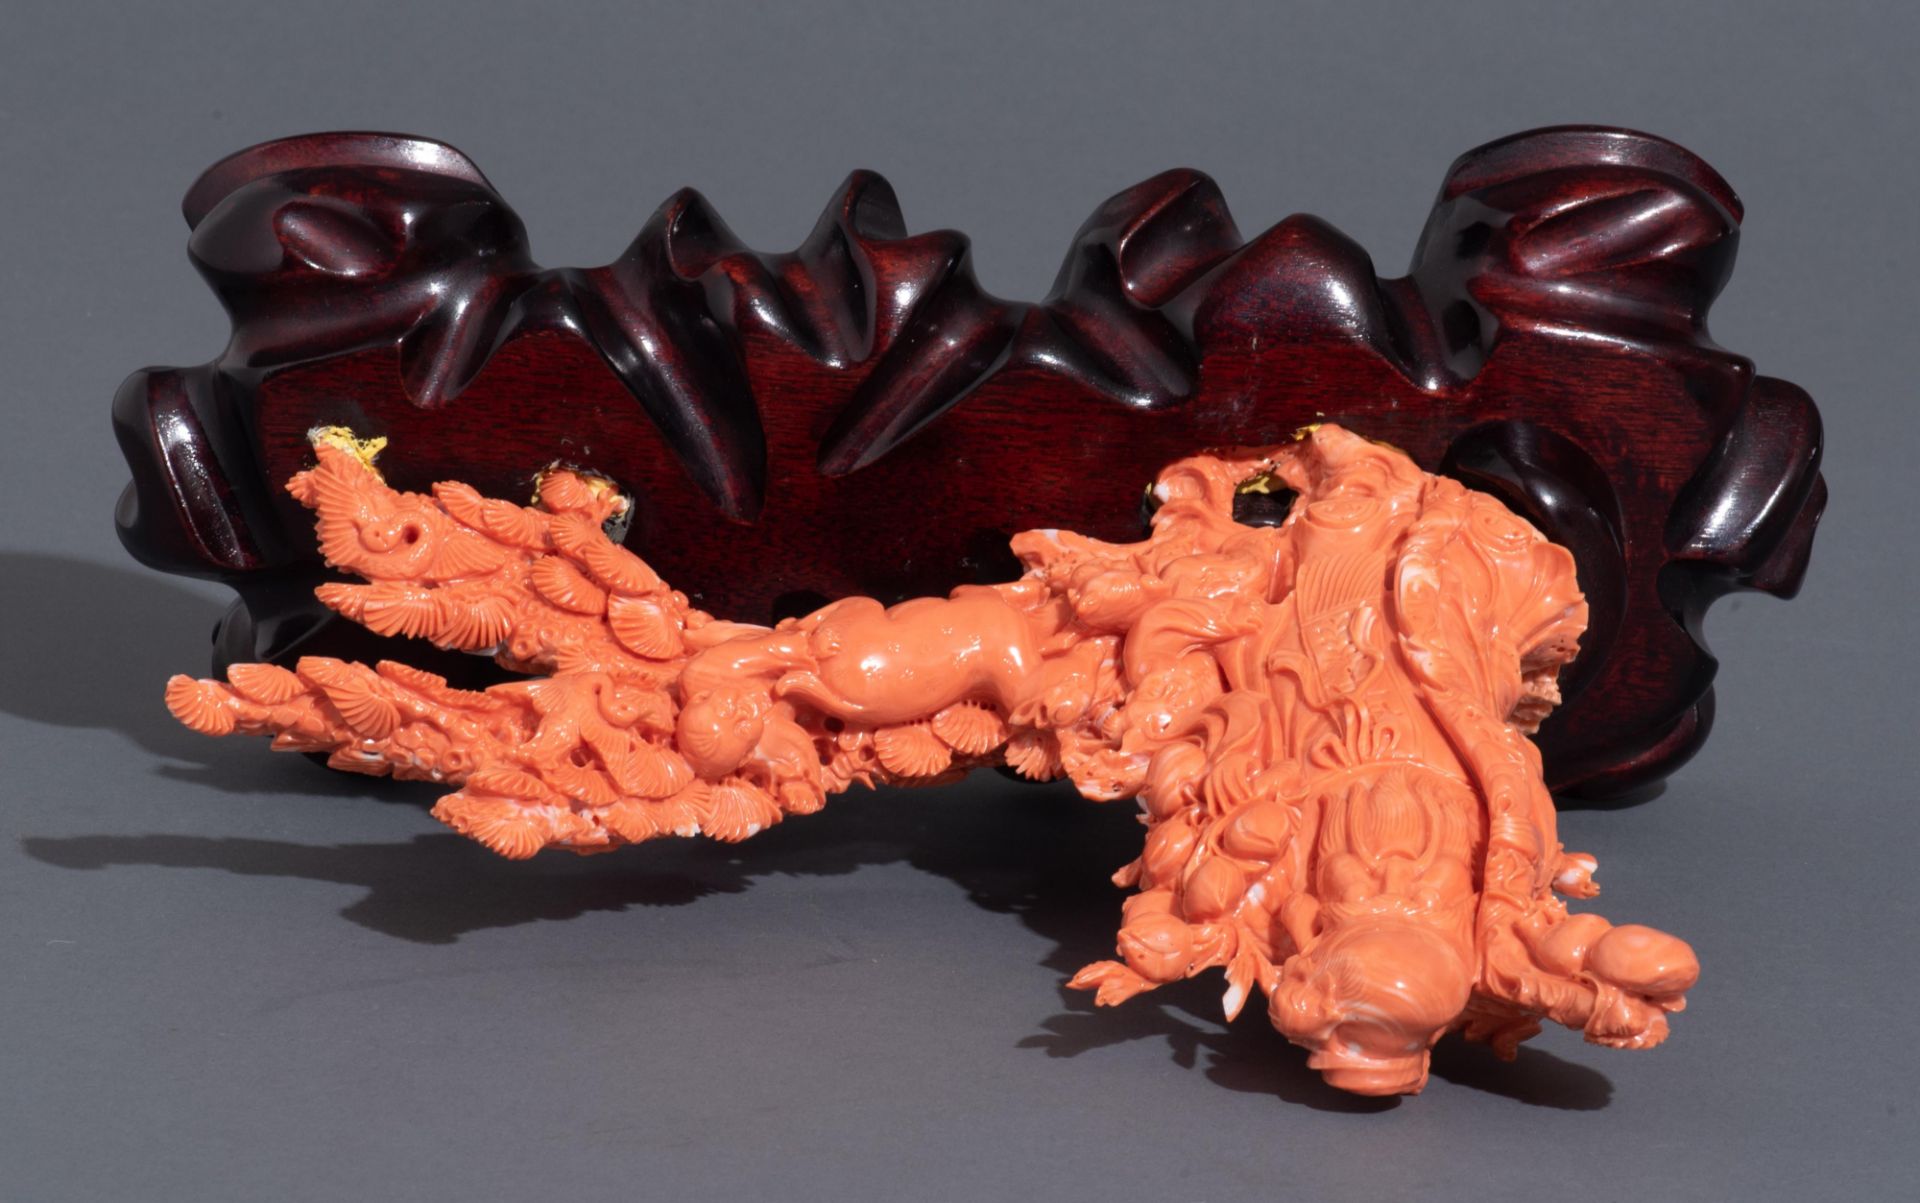 A Chinese sculpted red coral group, around 19thC, H 20,5 cm - Weight coral: about 1,3 kg - Image 7 of 12